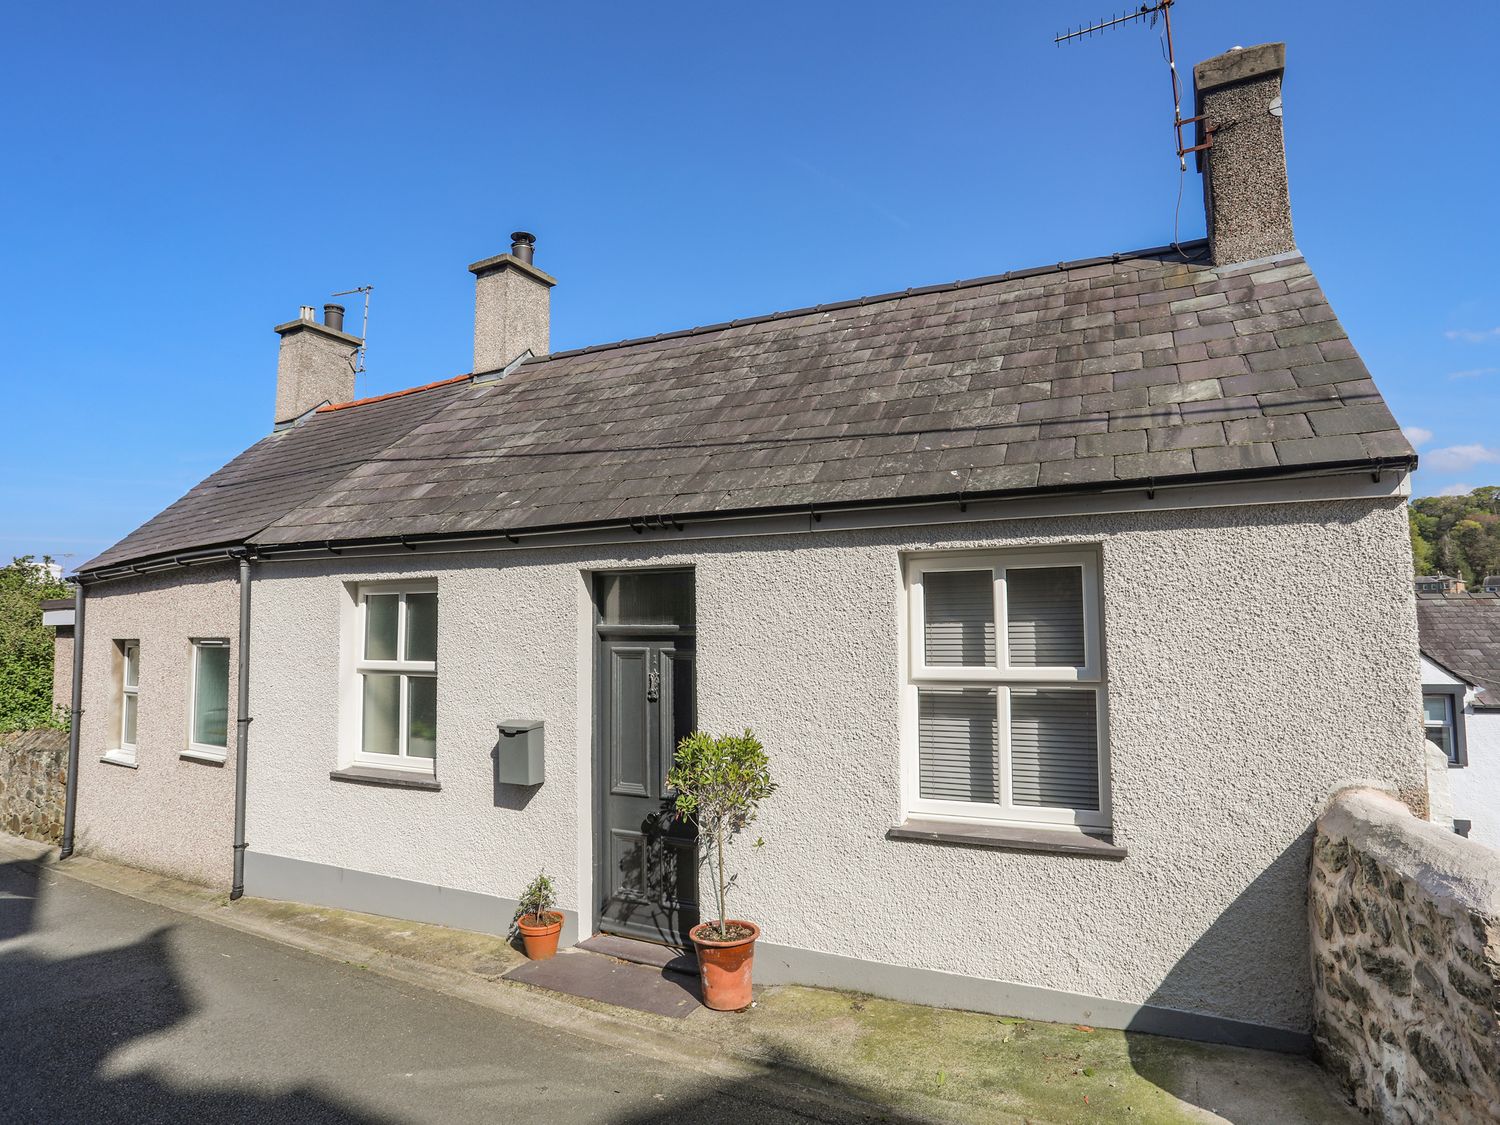 1 Cambria Road - Anglesey - 1101247 - photo 1